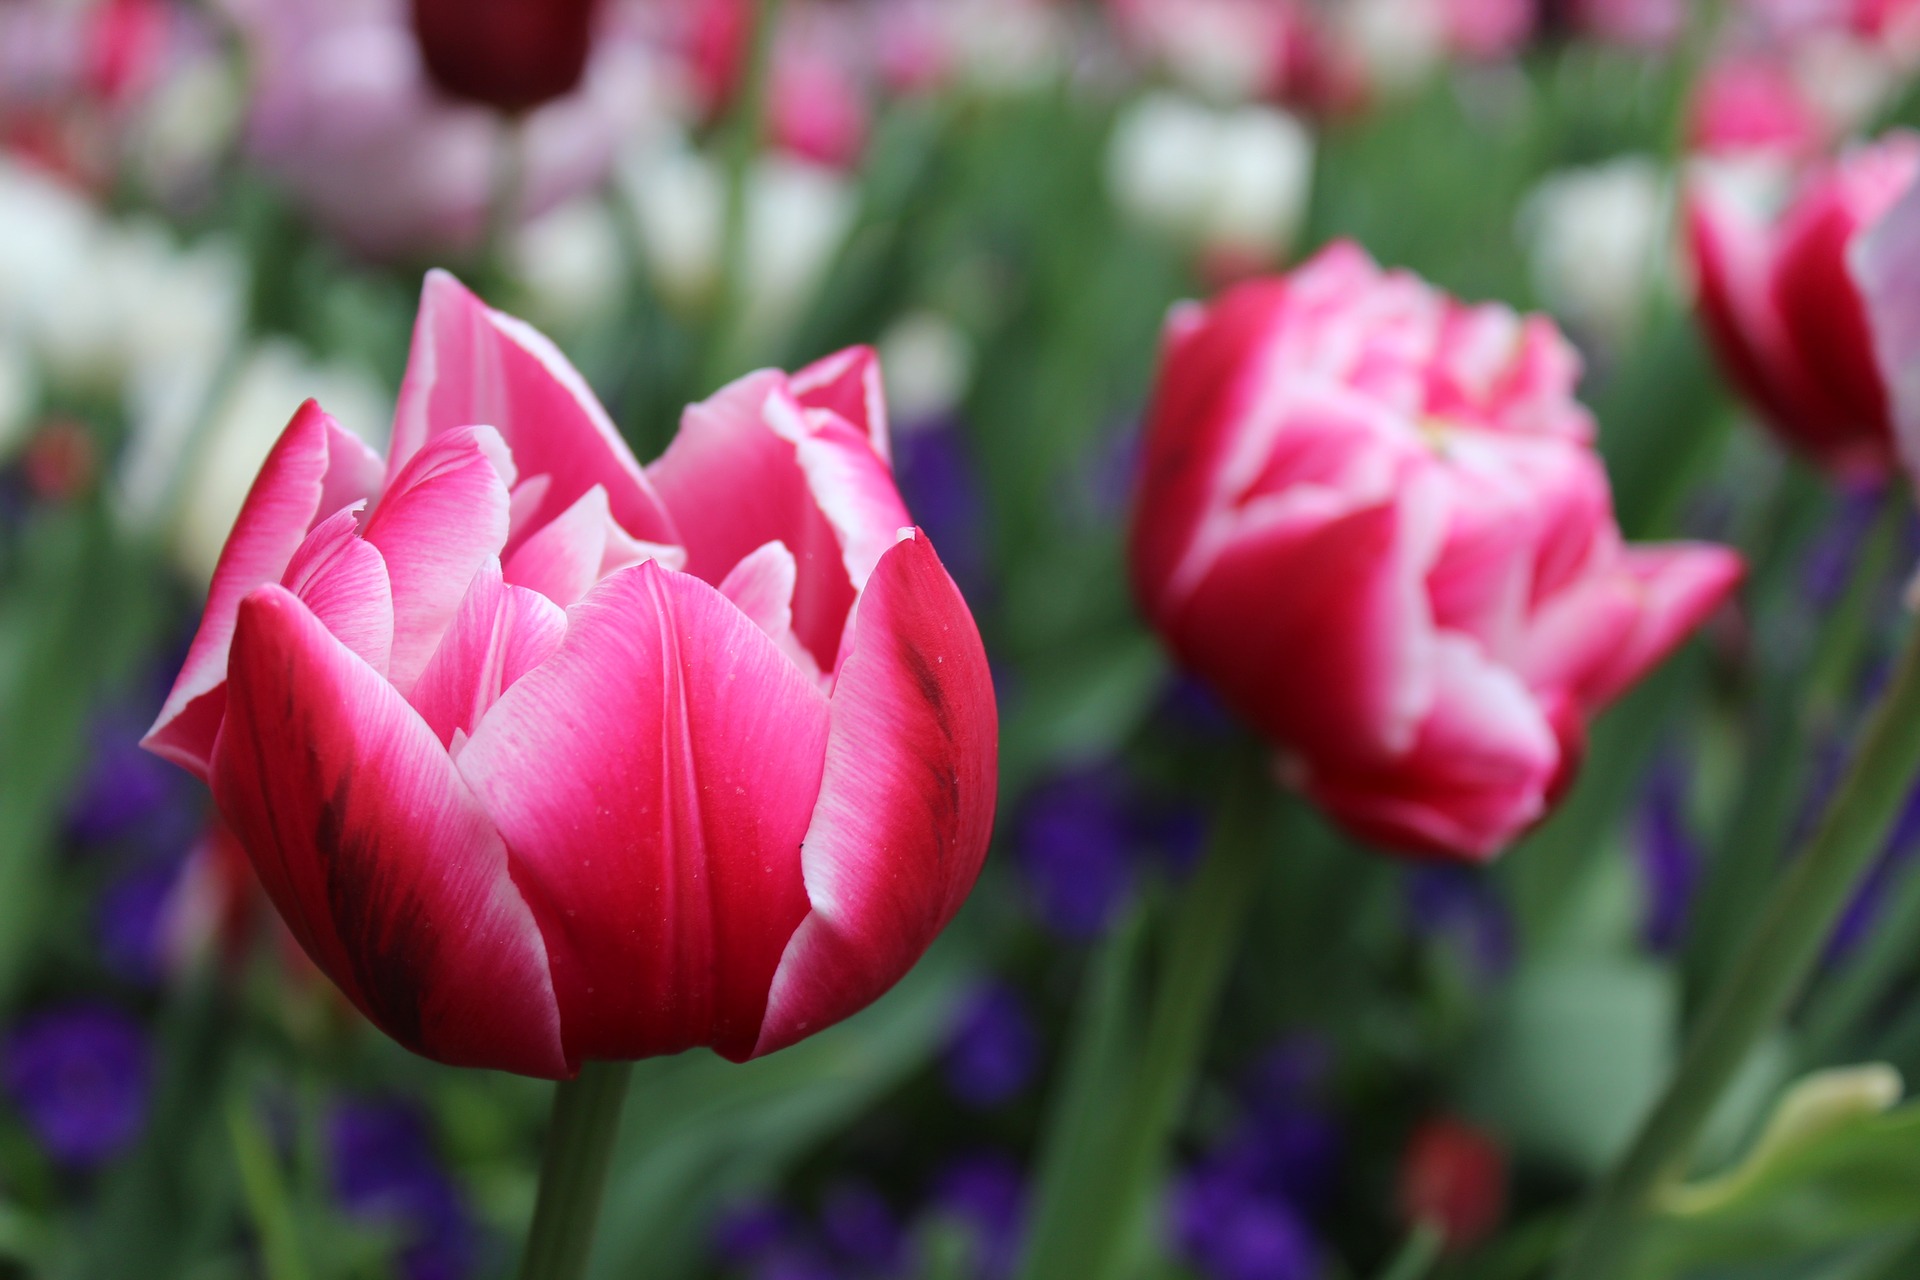 How to plant tulips from bulbs, Tips for growing tulip bulbs in flower pots